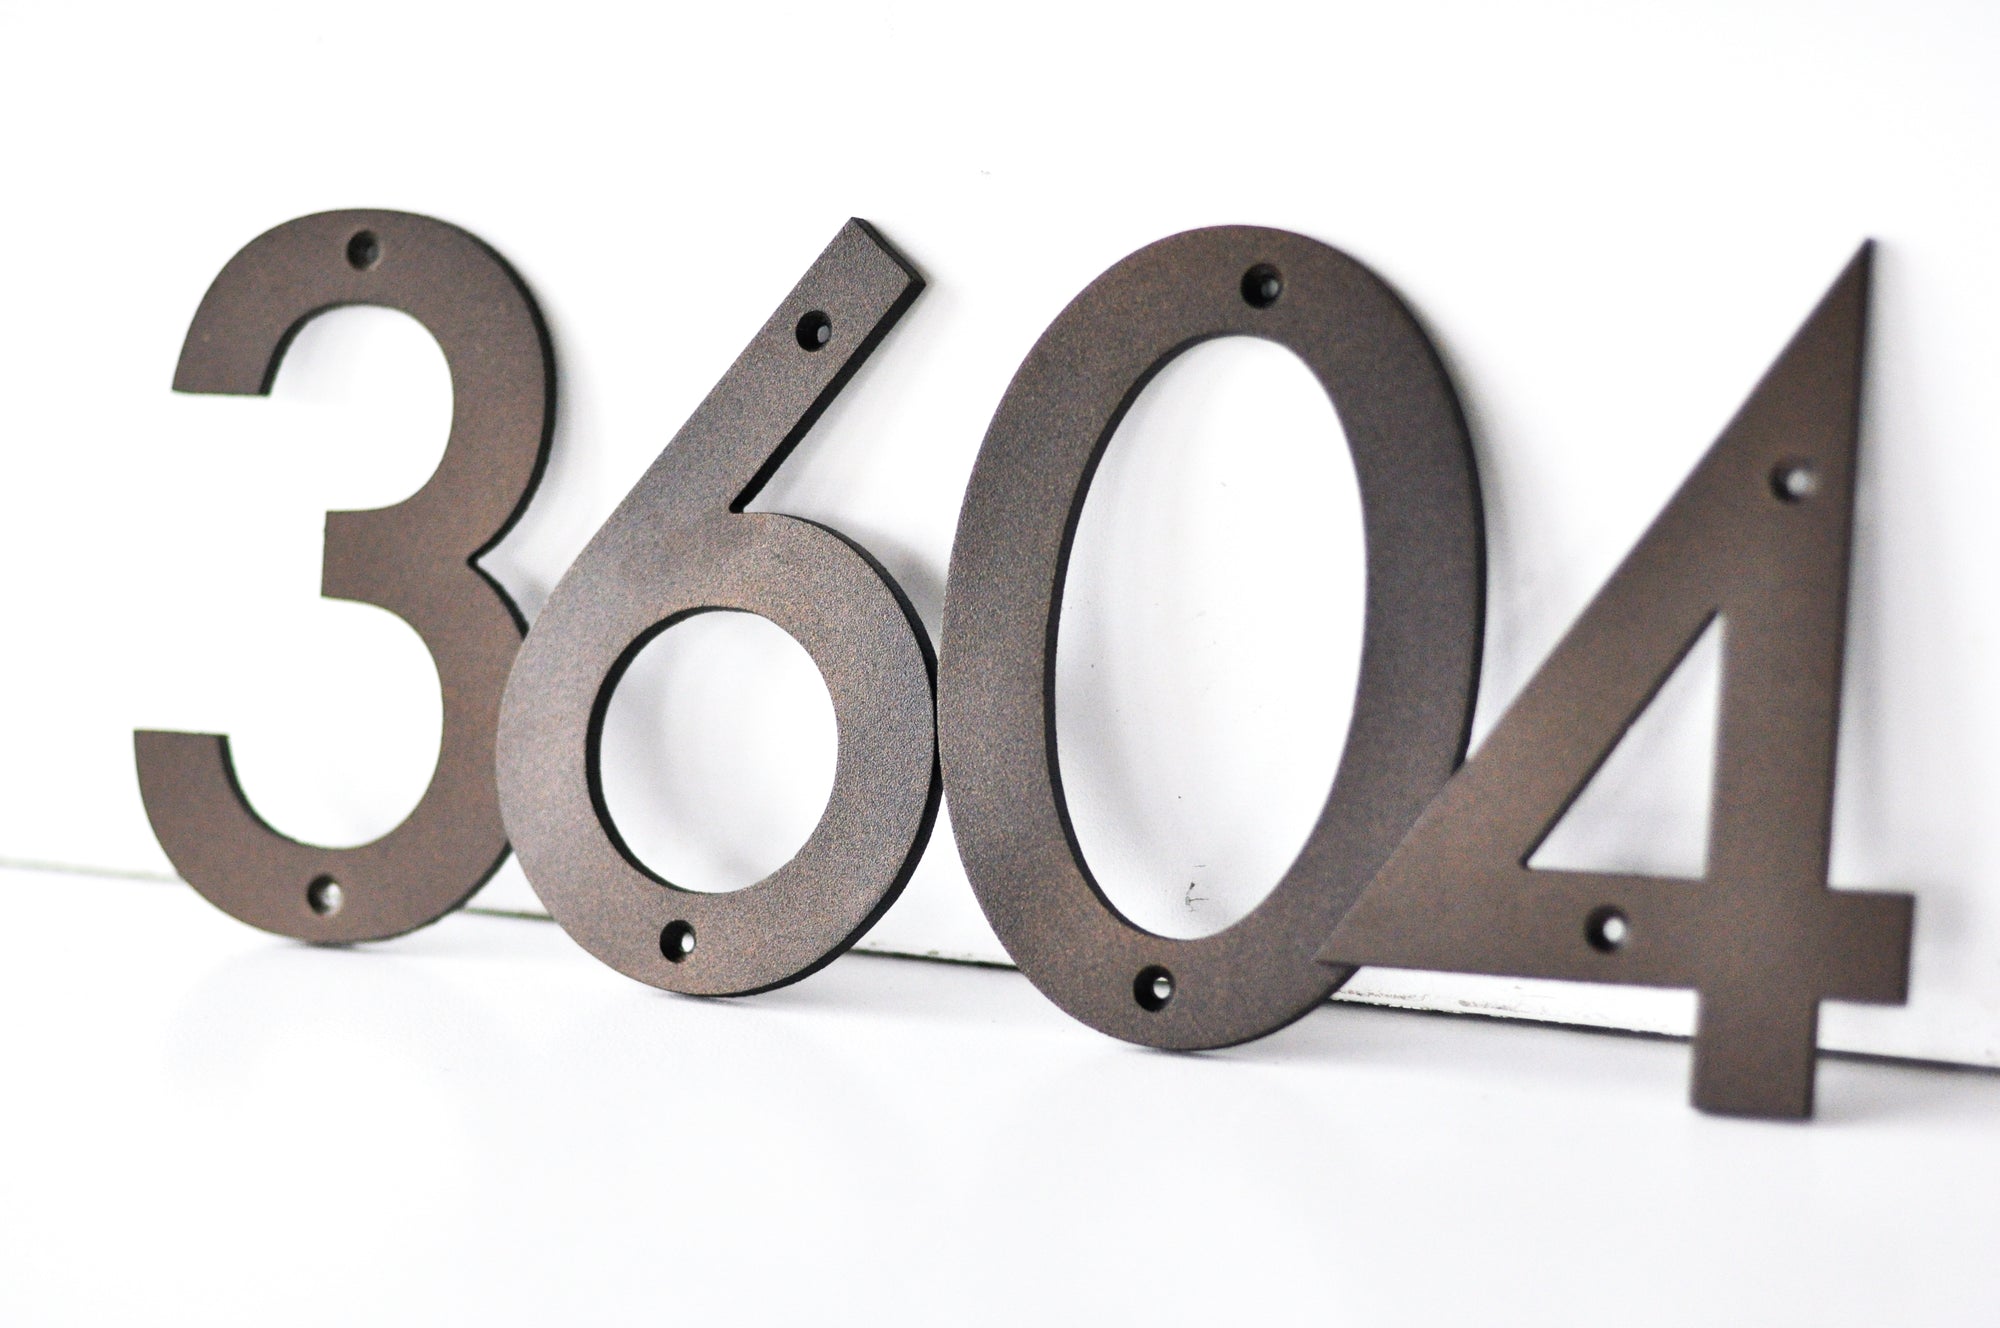 Oil Rubbed Bronze Powder Coated Aluminum Numbers